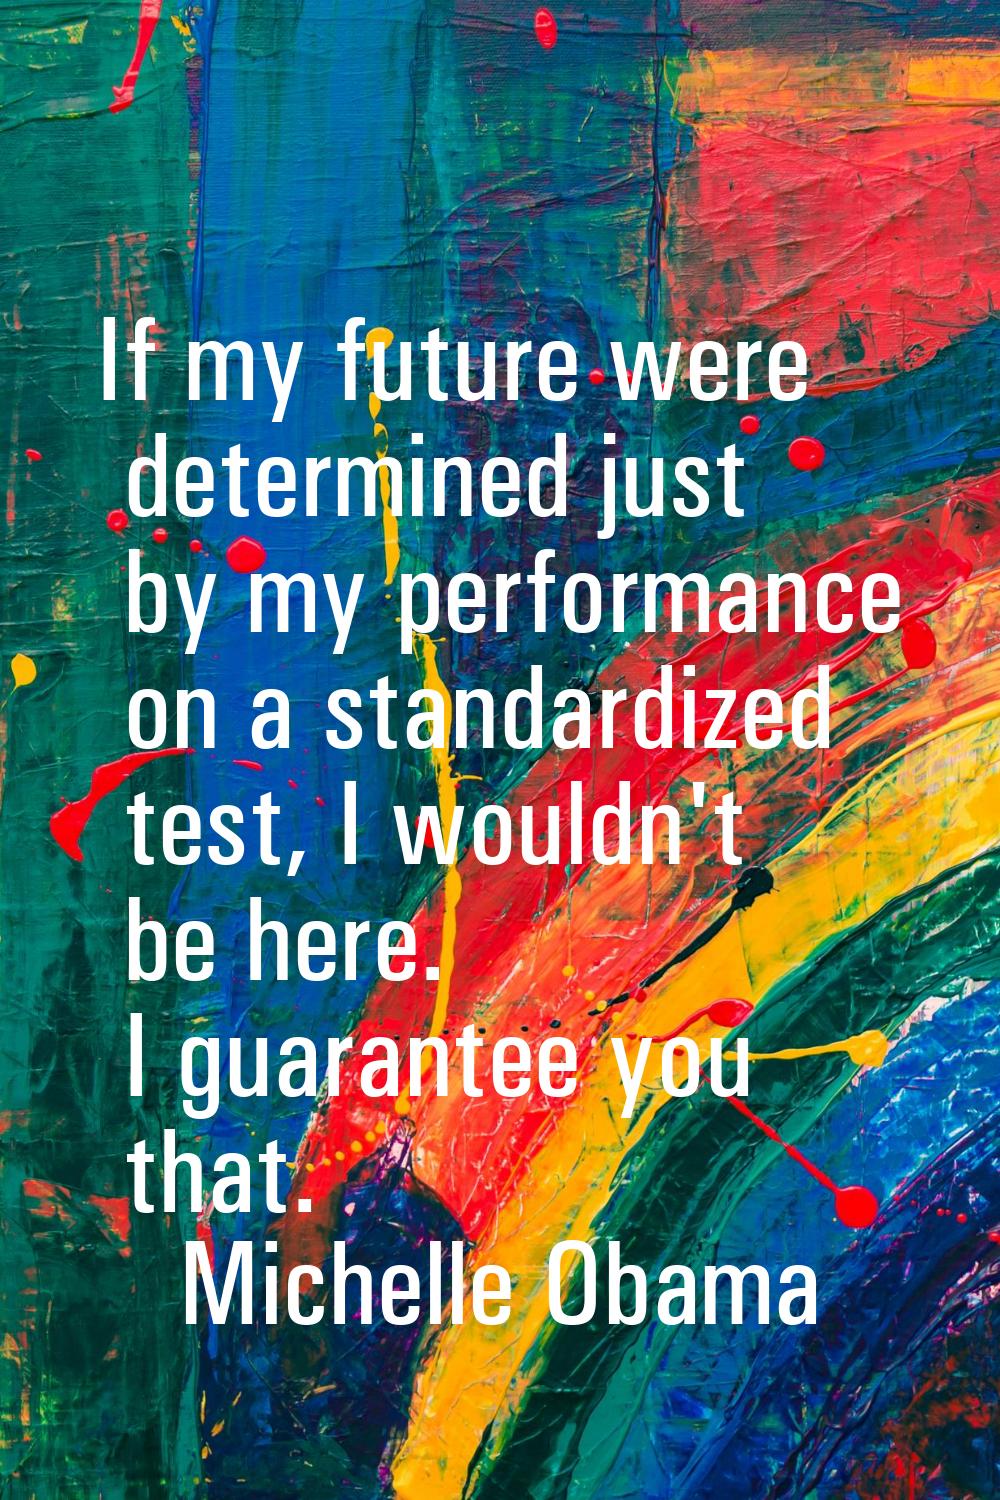 If my future were determined just by my performance on a standardized test, I wouldn't be here. I g